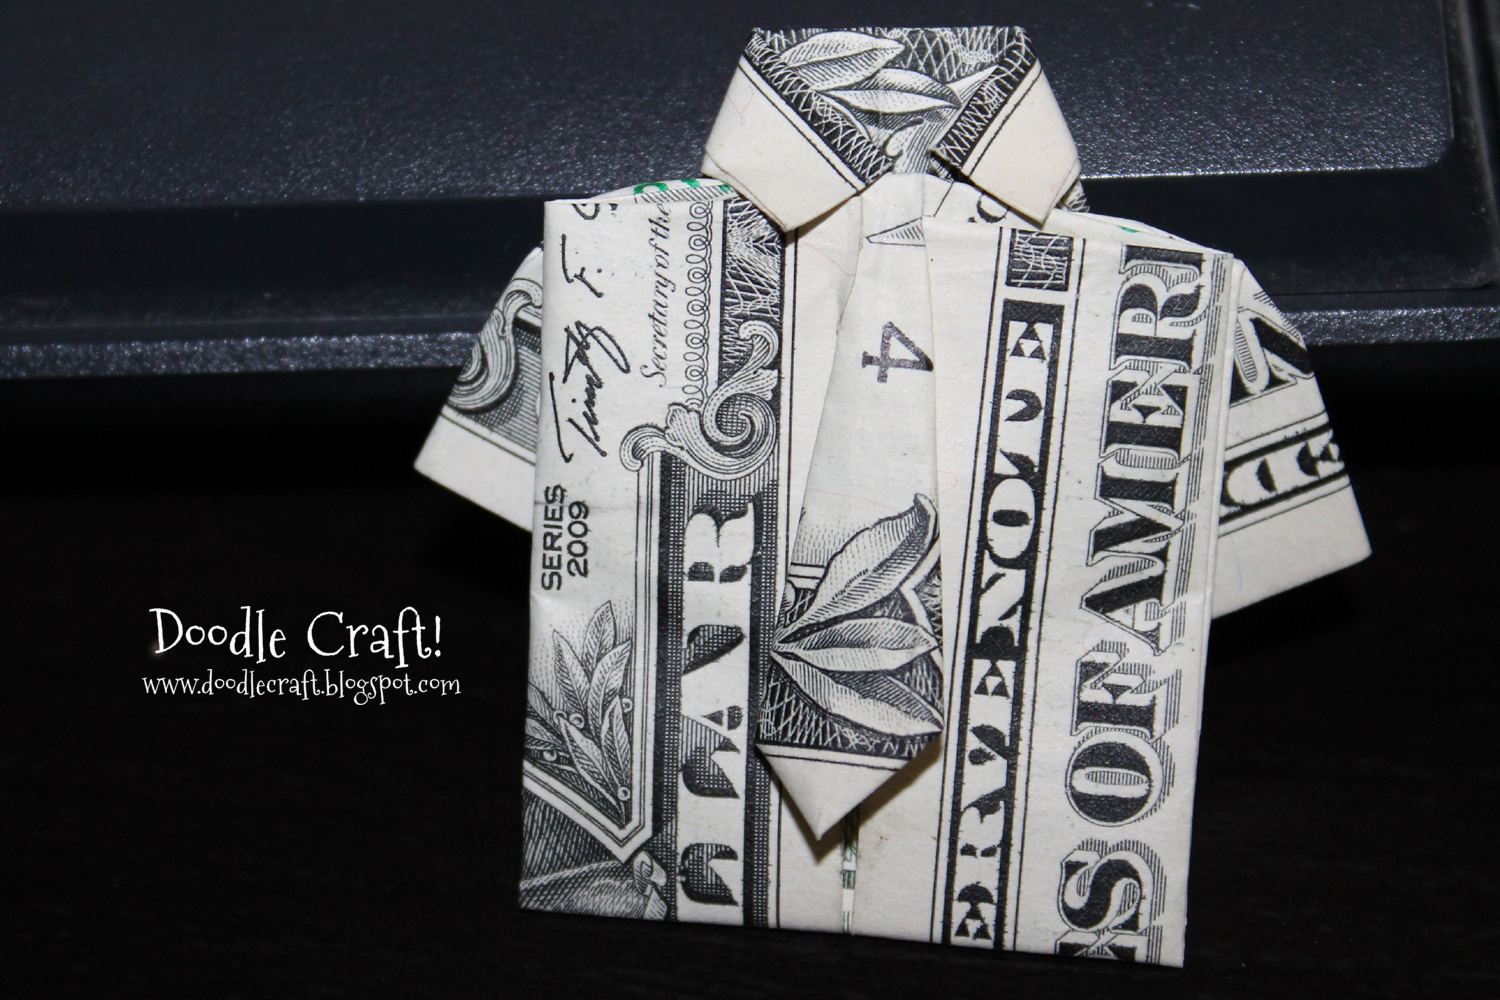 Dollar Bill Origami Shirt With Tie Origami Money Folding Shirt And Tie